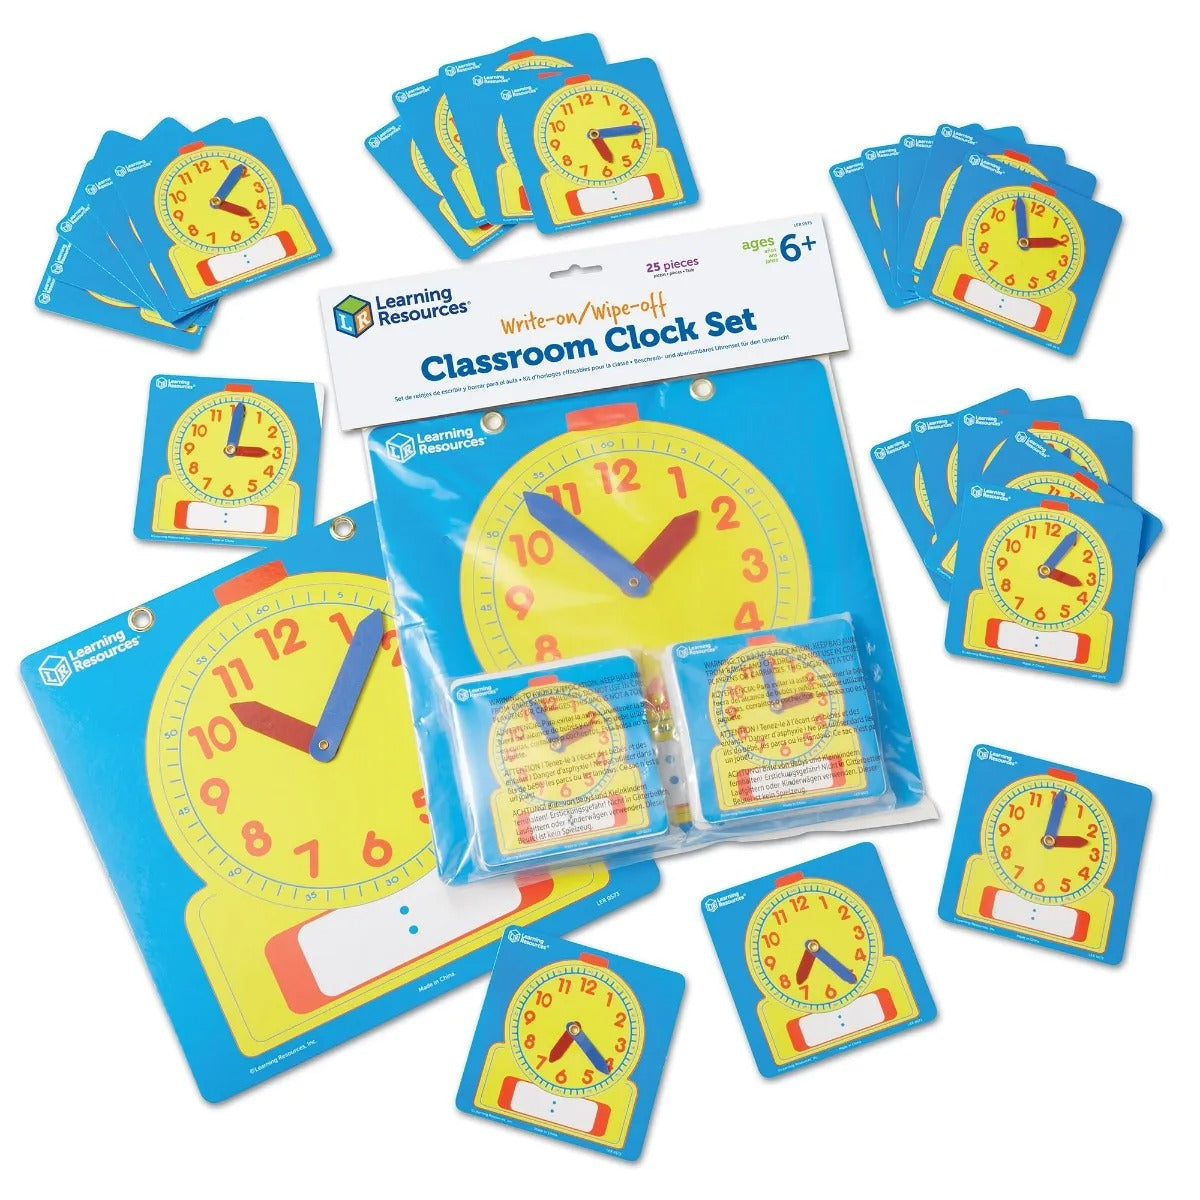 Classroom Clock Kit, Learning Resources Wipe Clean Classroom Clock Kit comes with laminated write & wipe clocks feature movable plastic hands and a place to write in the digital time. Ideal for introducing primary numeracy classes to the concept of time these student clocks measure 11cm square while the demonstration clock measures 30.5cm square. Comprehensive set includes one demonstration clock and 24 student clocks.locks. Clocks are made from durable plastic and have easy-to-read hour and minute markings